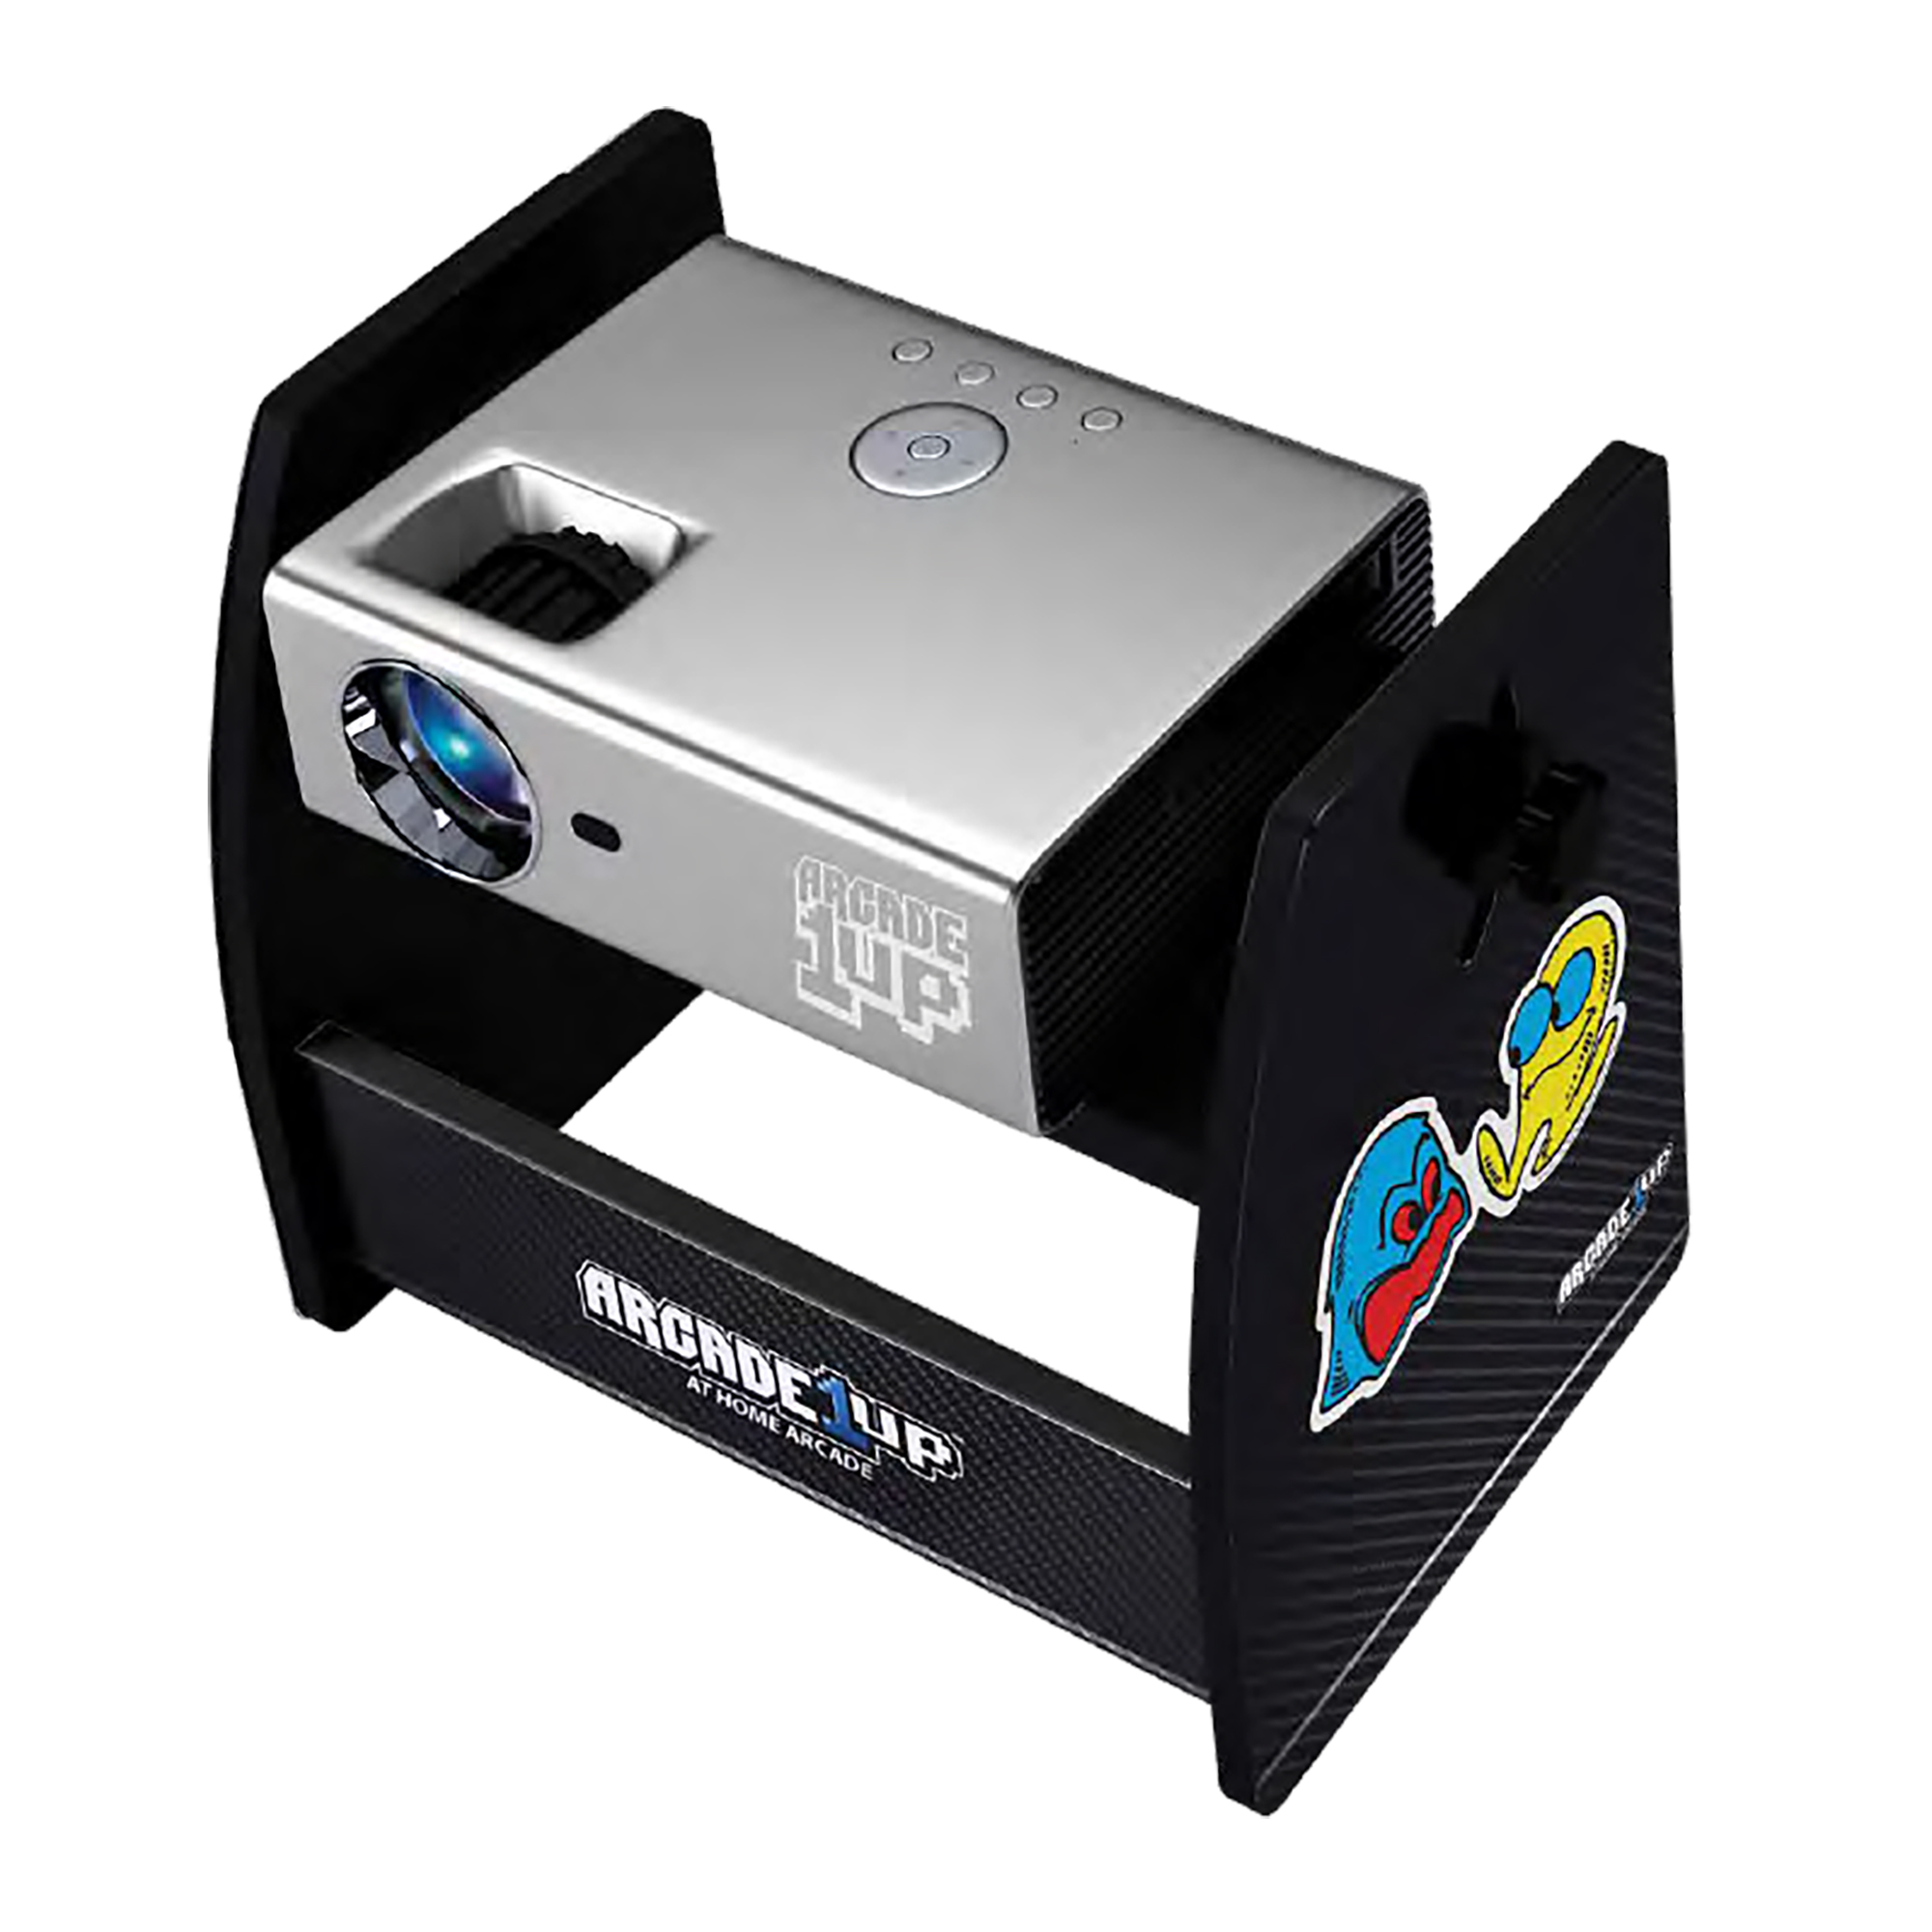 Arcade1Up Projector-Cade, Pac-Man Arcade Game System - image 2 of 7